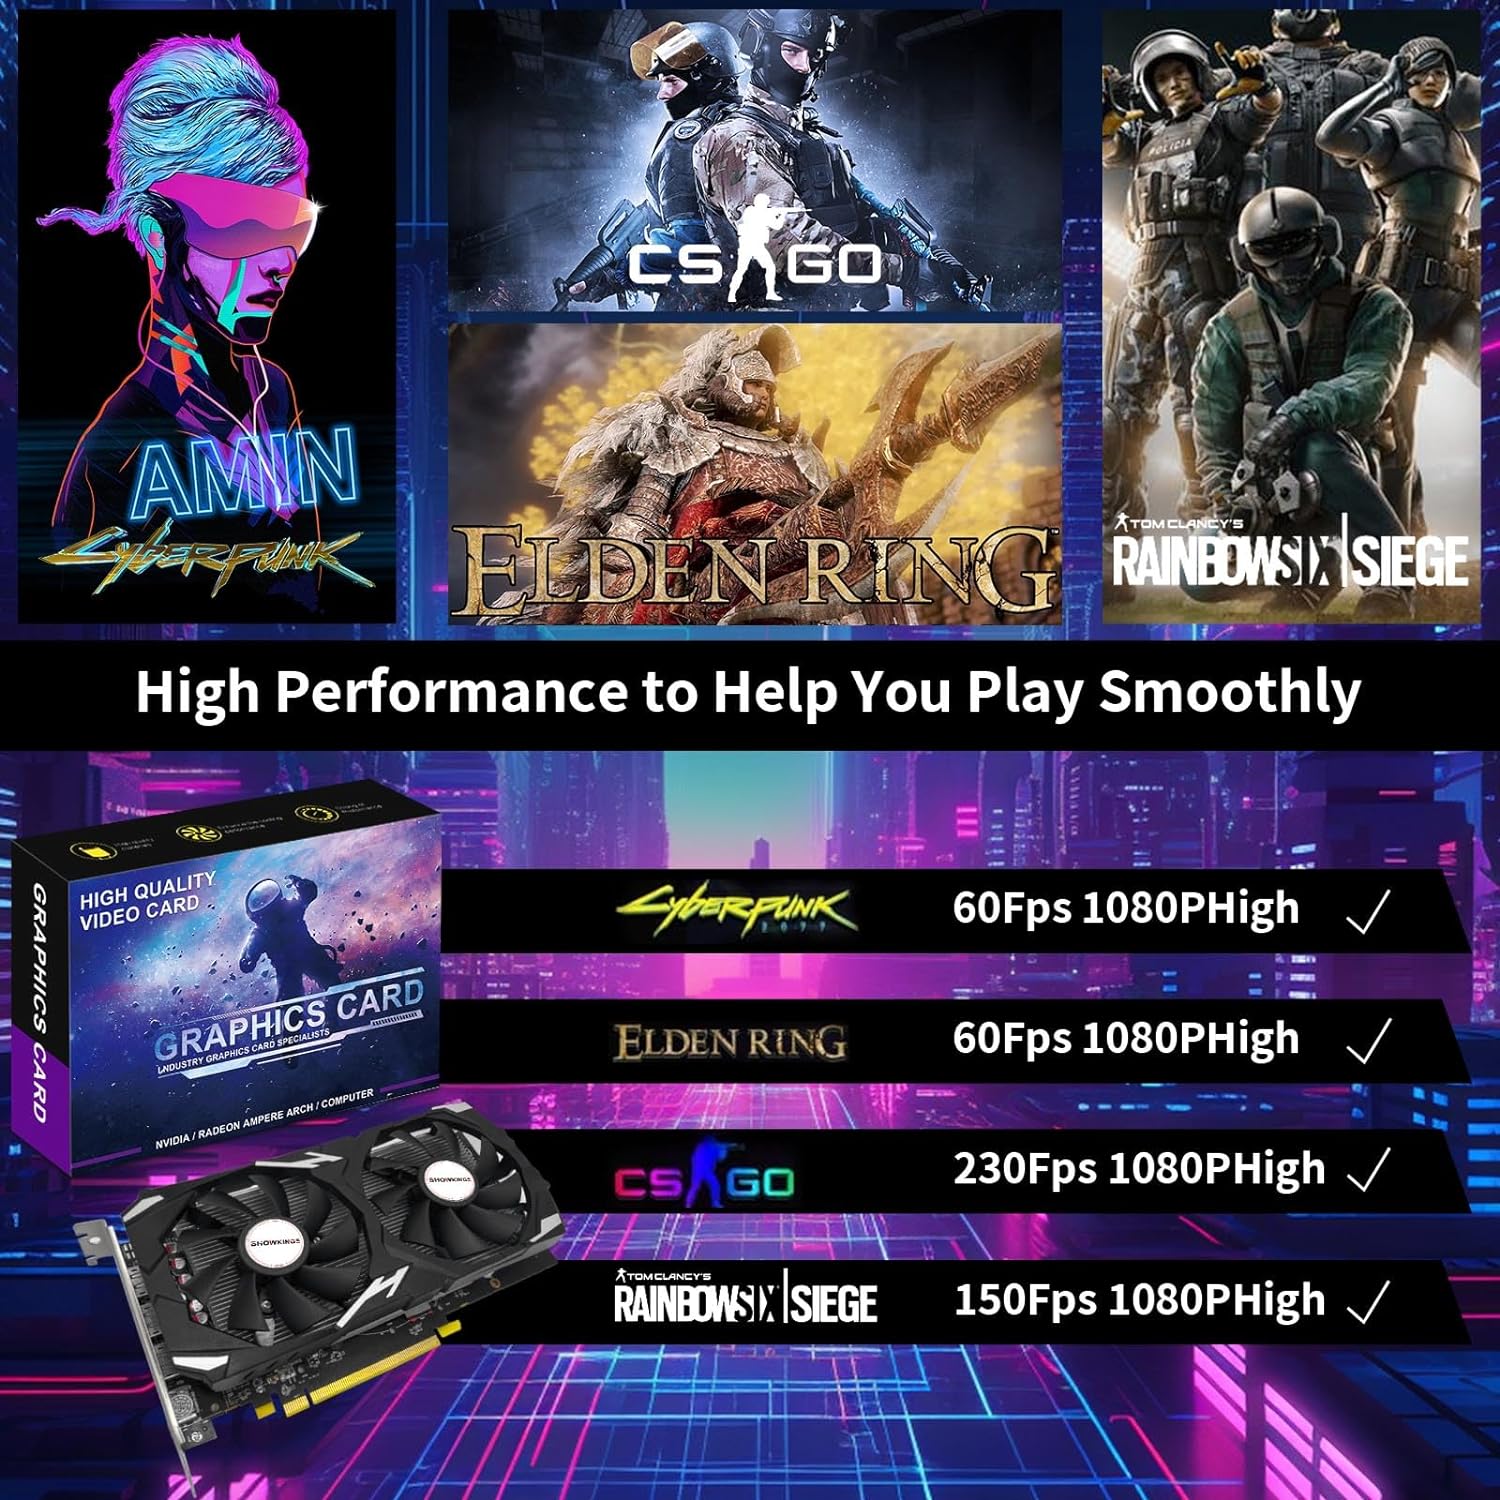 SHOWKINGS Radeon RX 580 8GB Graphics Card, 256Bit 2048SP GDDR5 AMD Video Card for Pc Gaming, DP HDMI DVI-Output, PCI Express 3.0 with Dual Fan for Office and Gaming